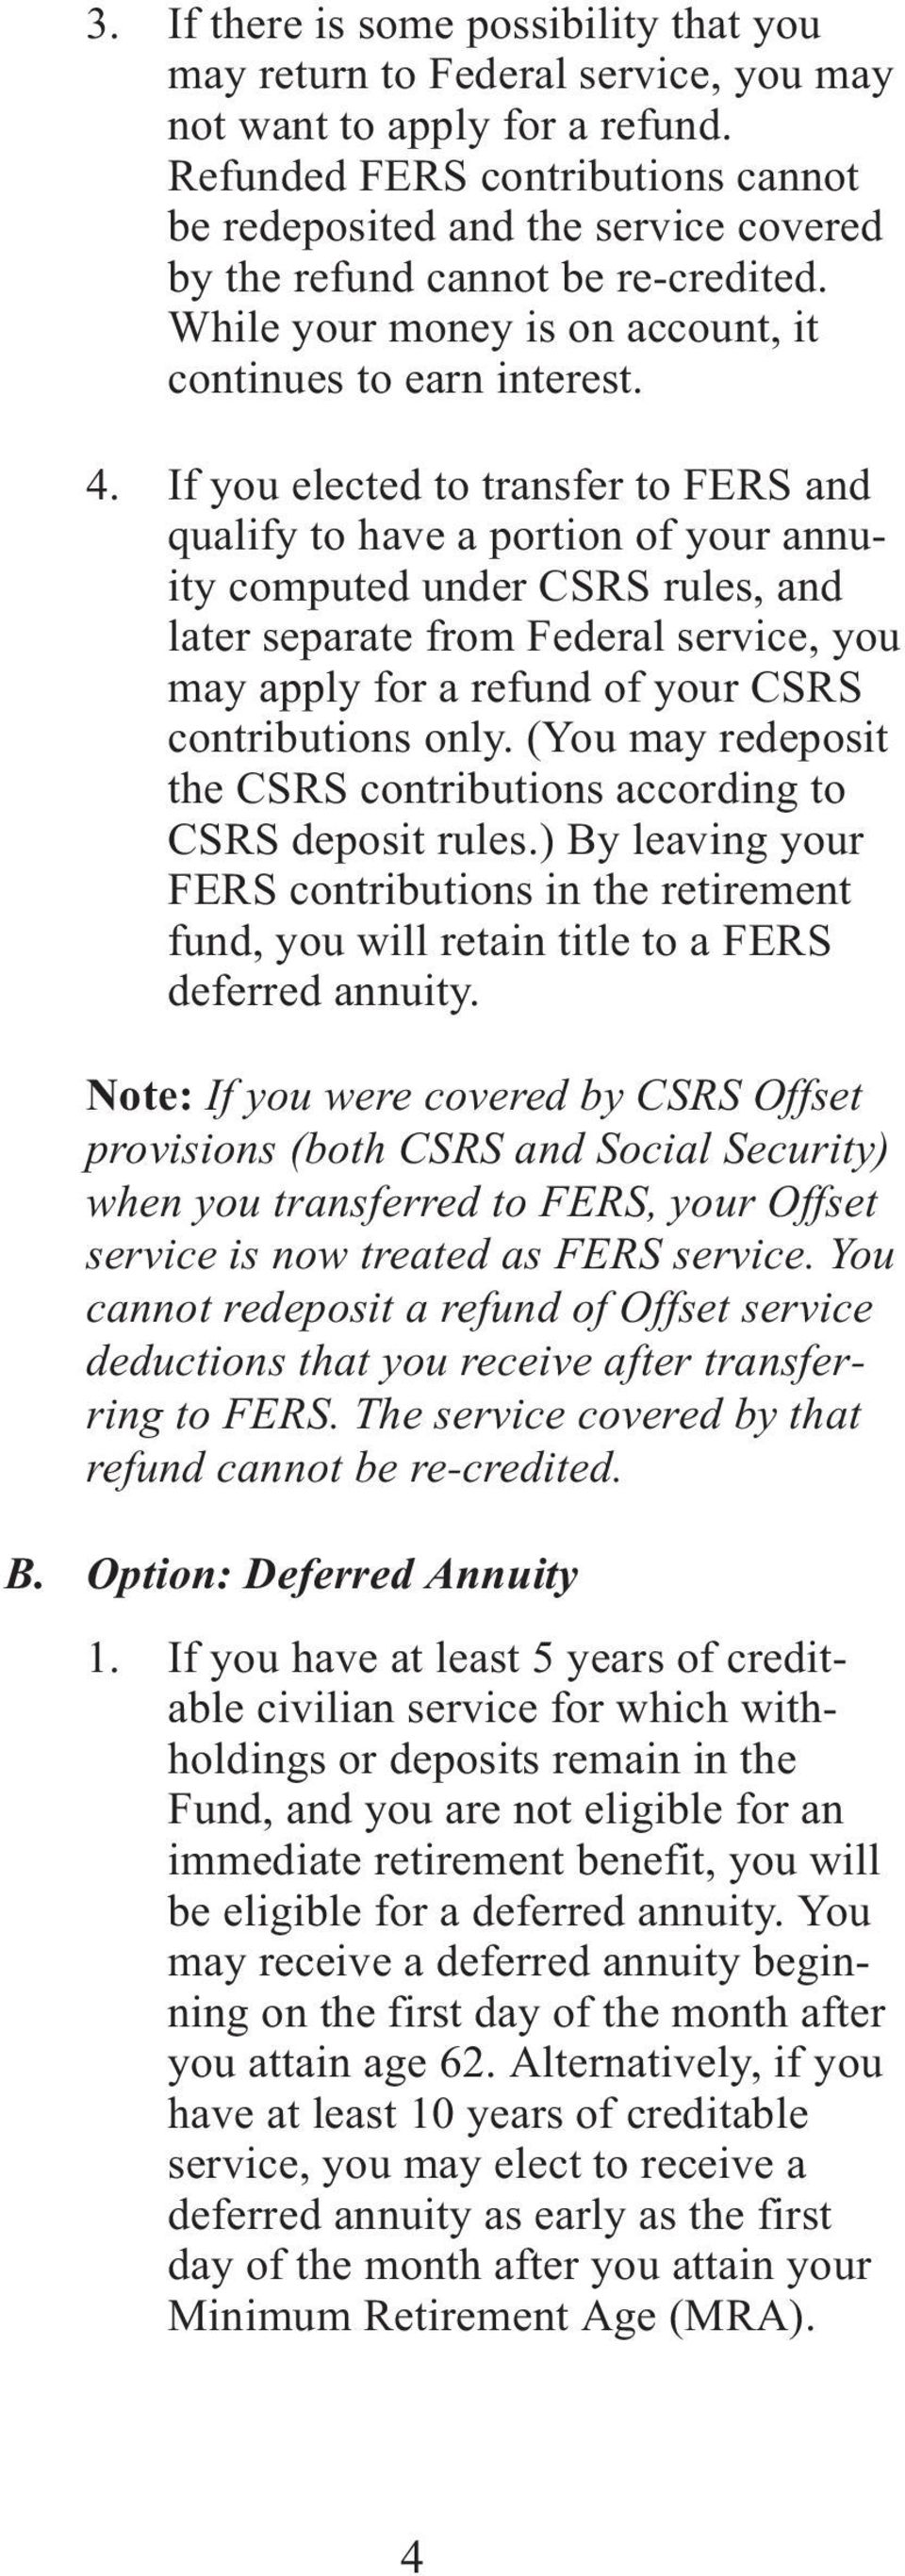 If you elected to transfer to FERS and qualify to have a portion of your annuity computed under CSRS rules, and later separate from Federal service, you may apply for a refund of your CSRS